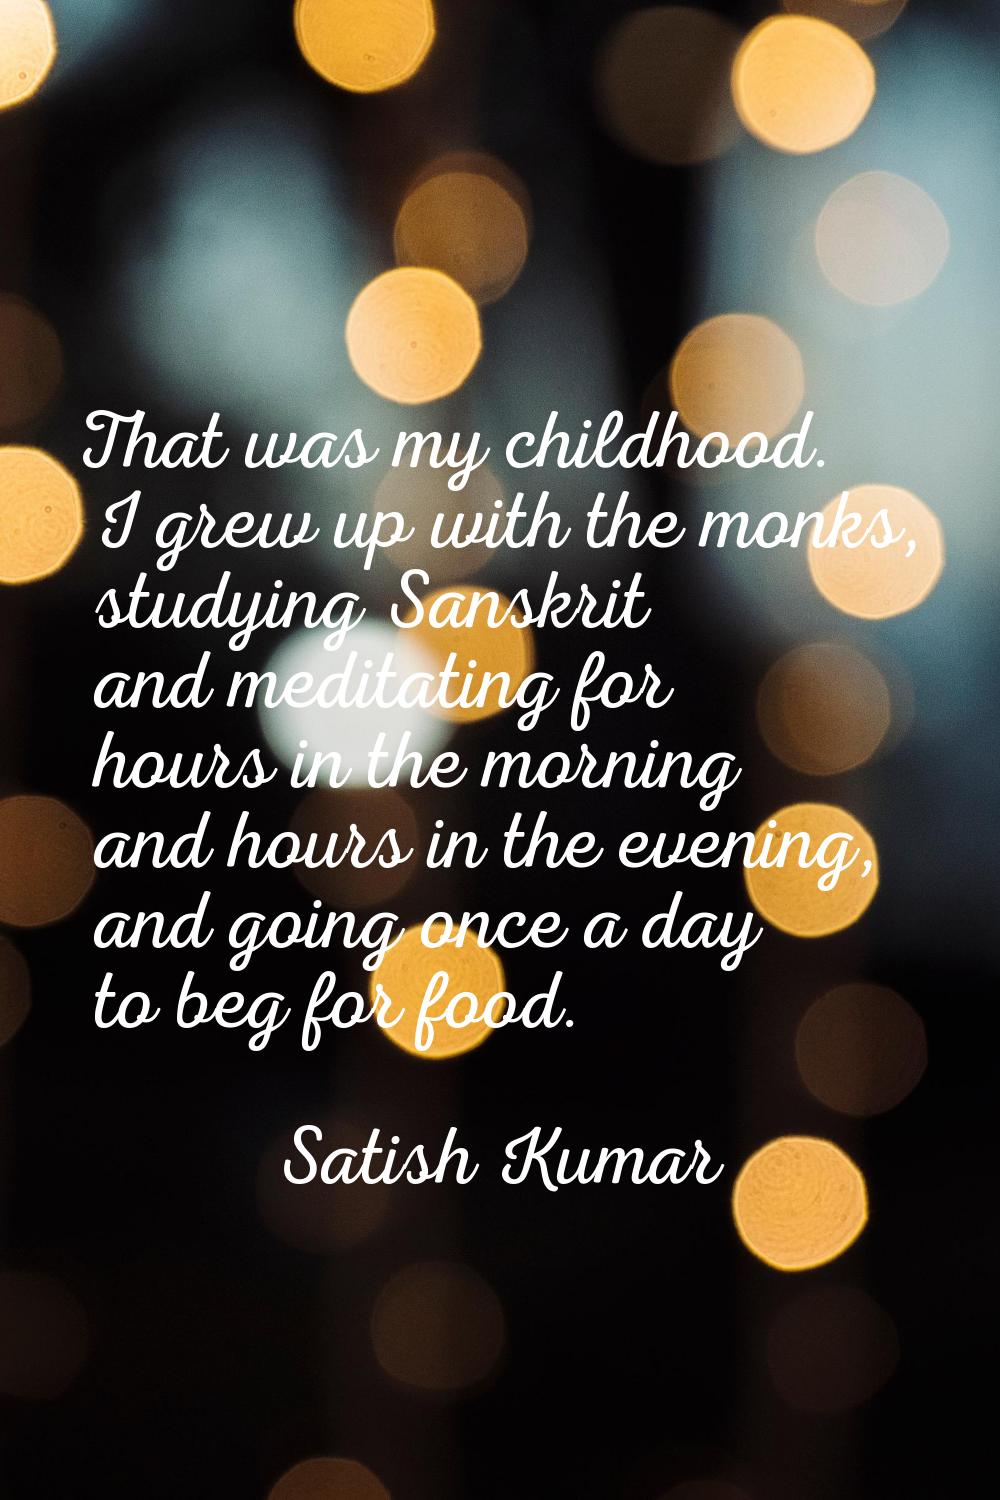 That was my childhood. I grew up with the monks, studying Sanskrit and meditating for hours in the 